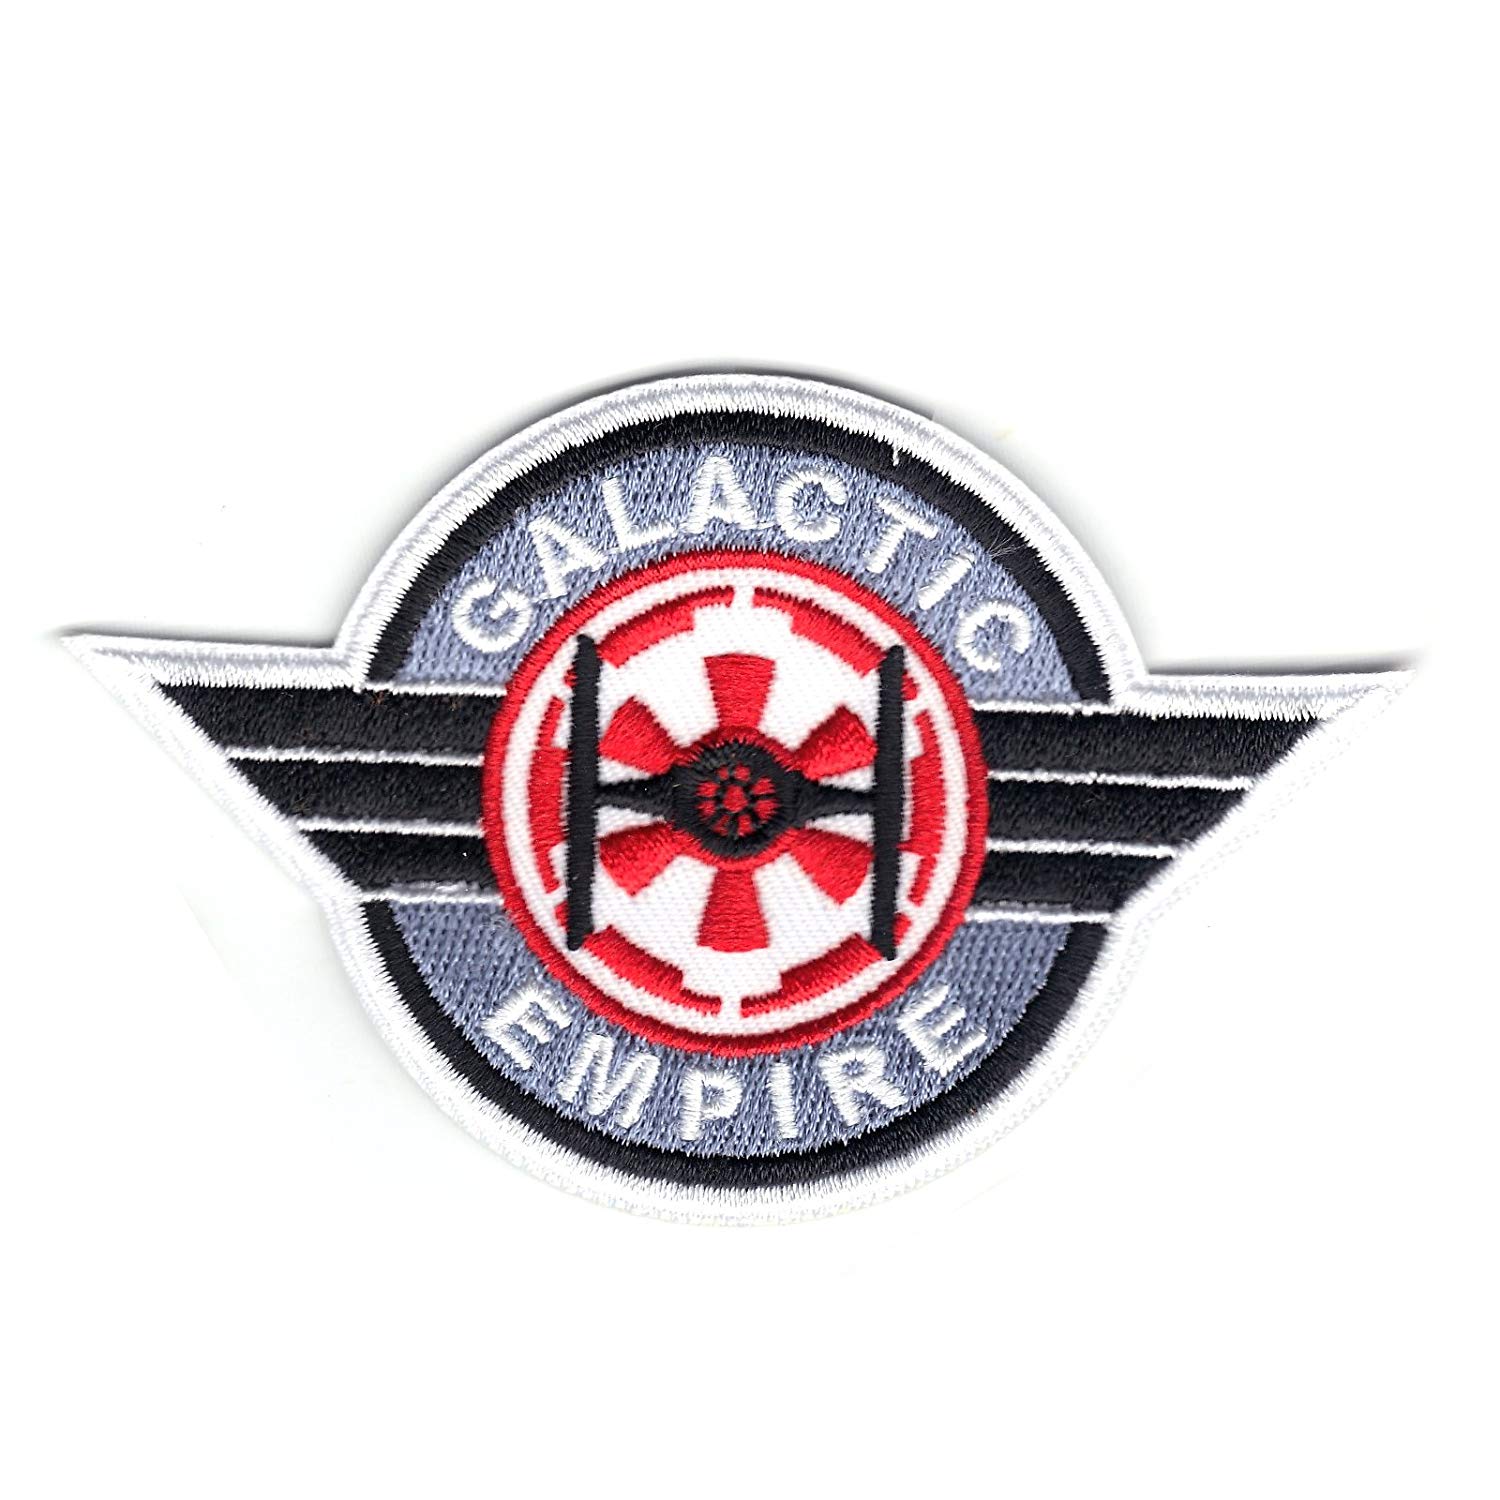 Solo: ASWS Galactic Empire Embroidered Iron-On Patch 2